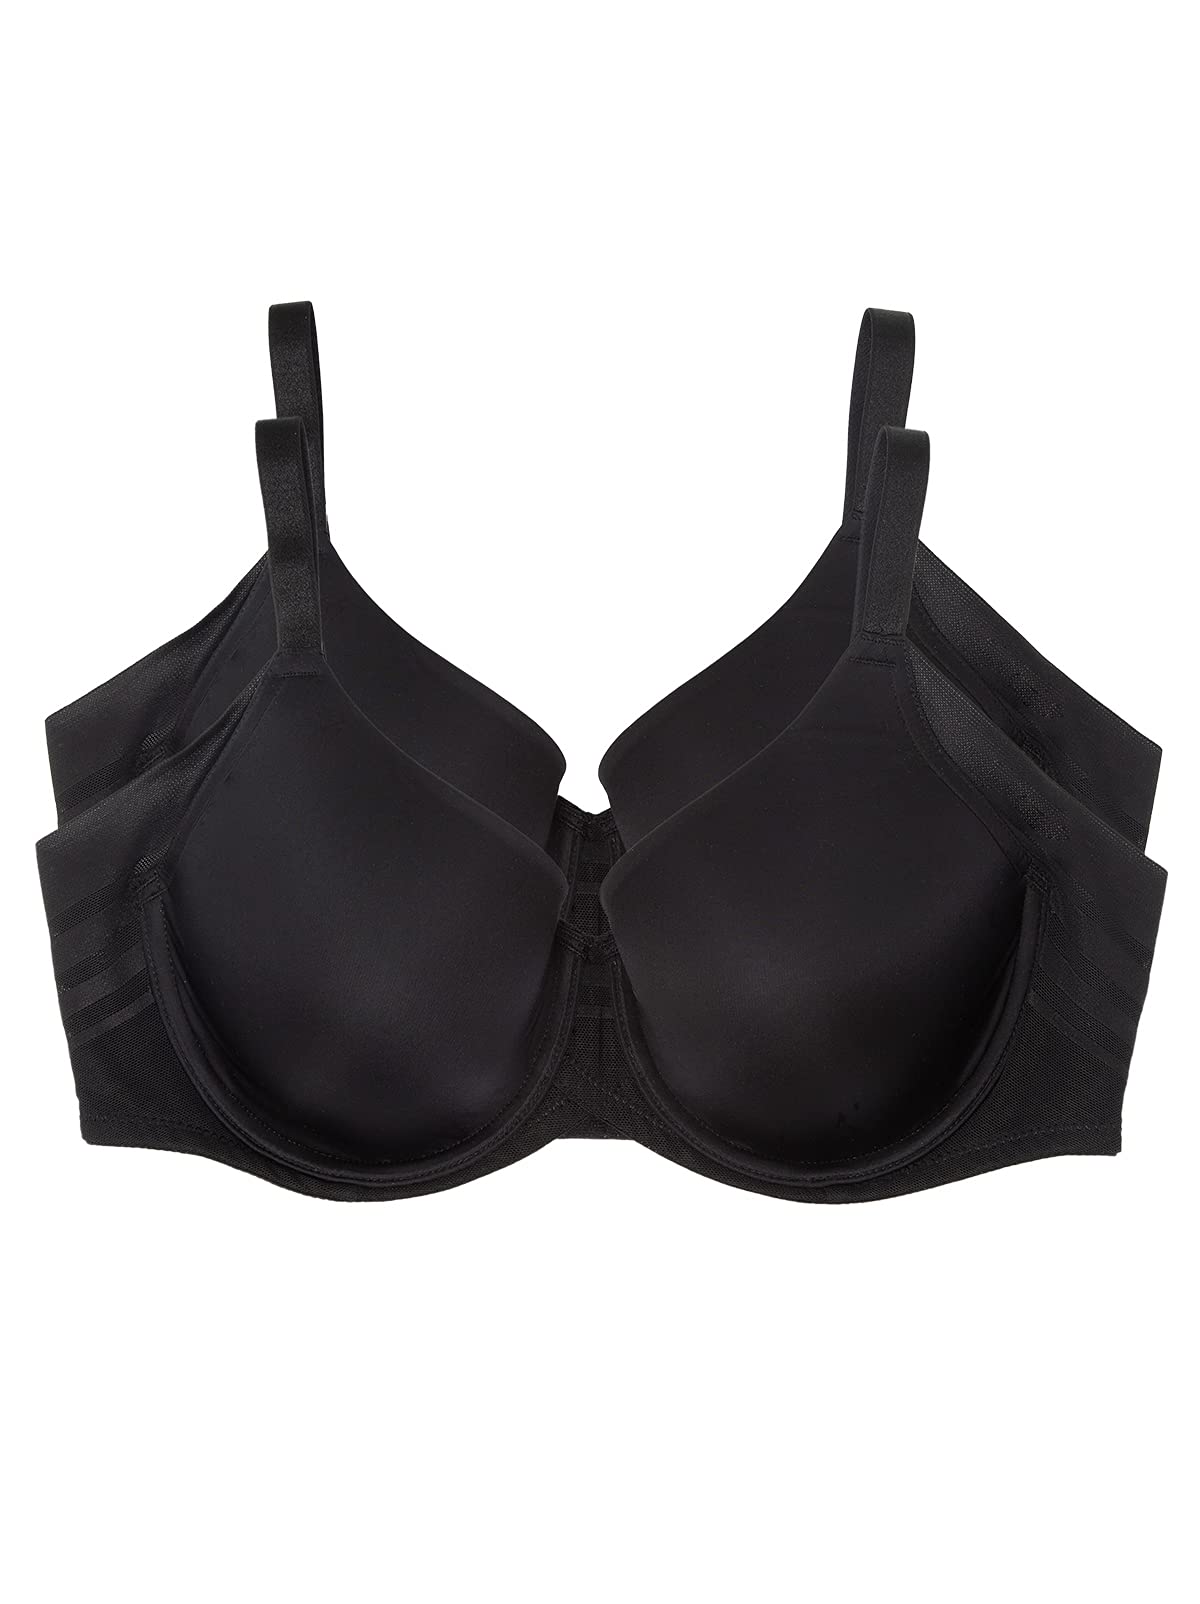 Felina Paramour Marvelous Side Smoothing T-Shirt Bra with Tighter Band Design 2-Pack (Black, 34g)